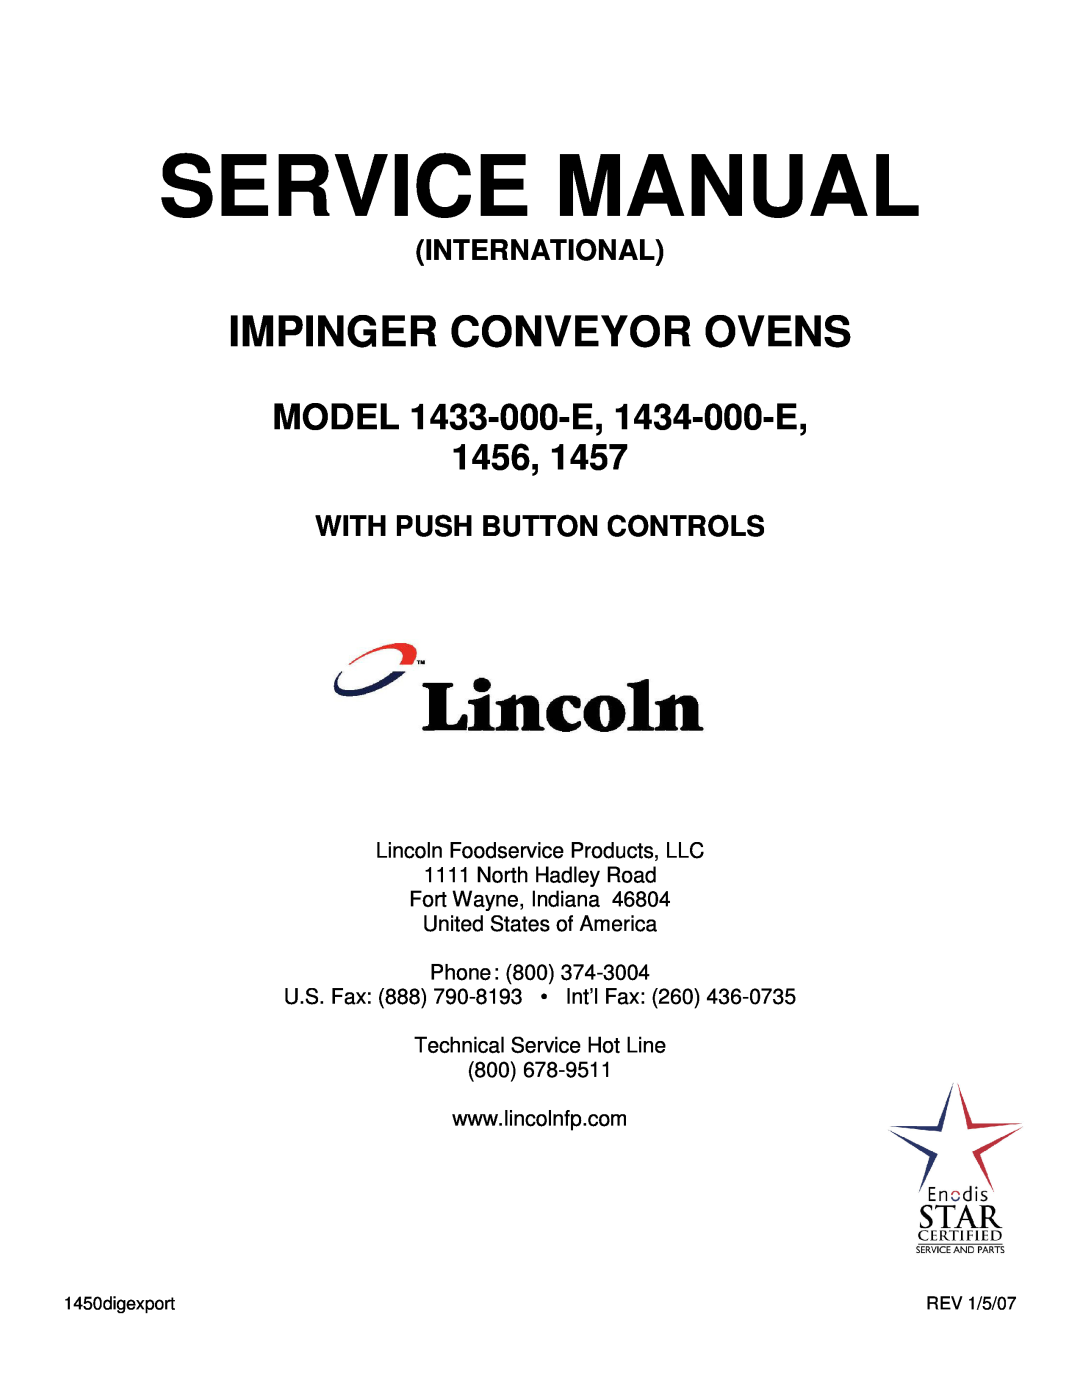 Sigma 1456, 1457 service manual Lincoln Foodservice Products, LLC, North Hadley Road Fort Wayne, Indiana, 1450digexport 